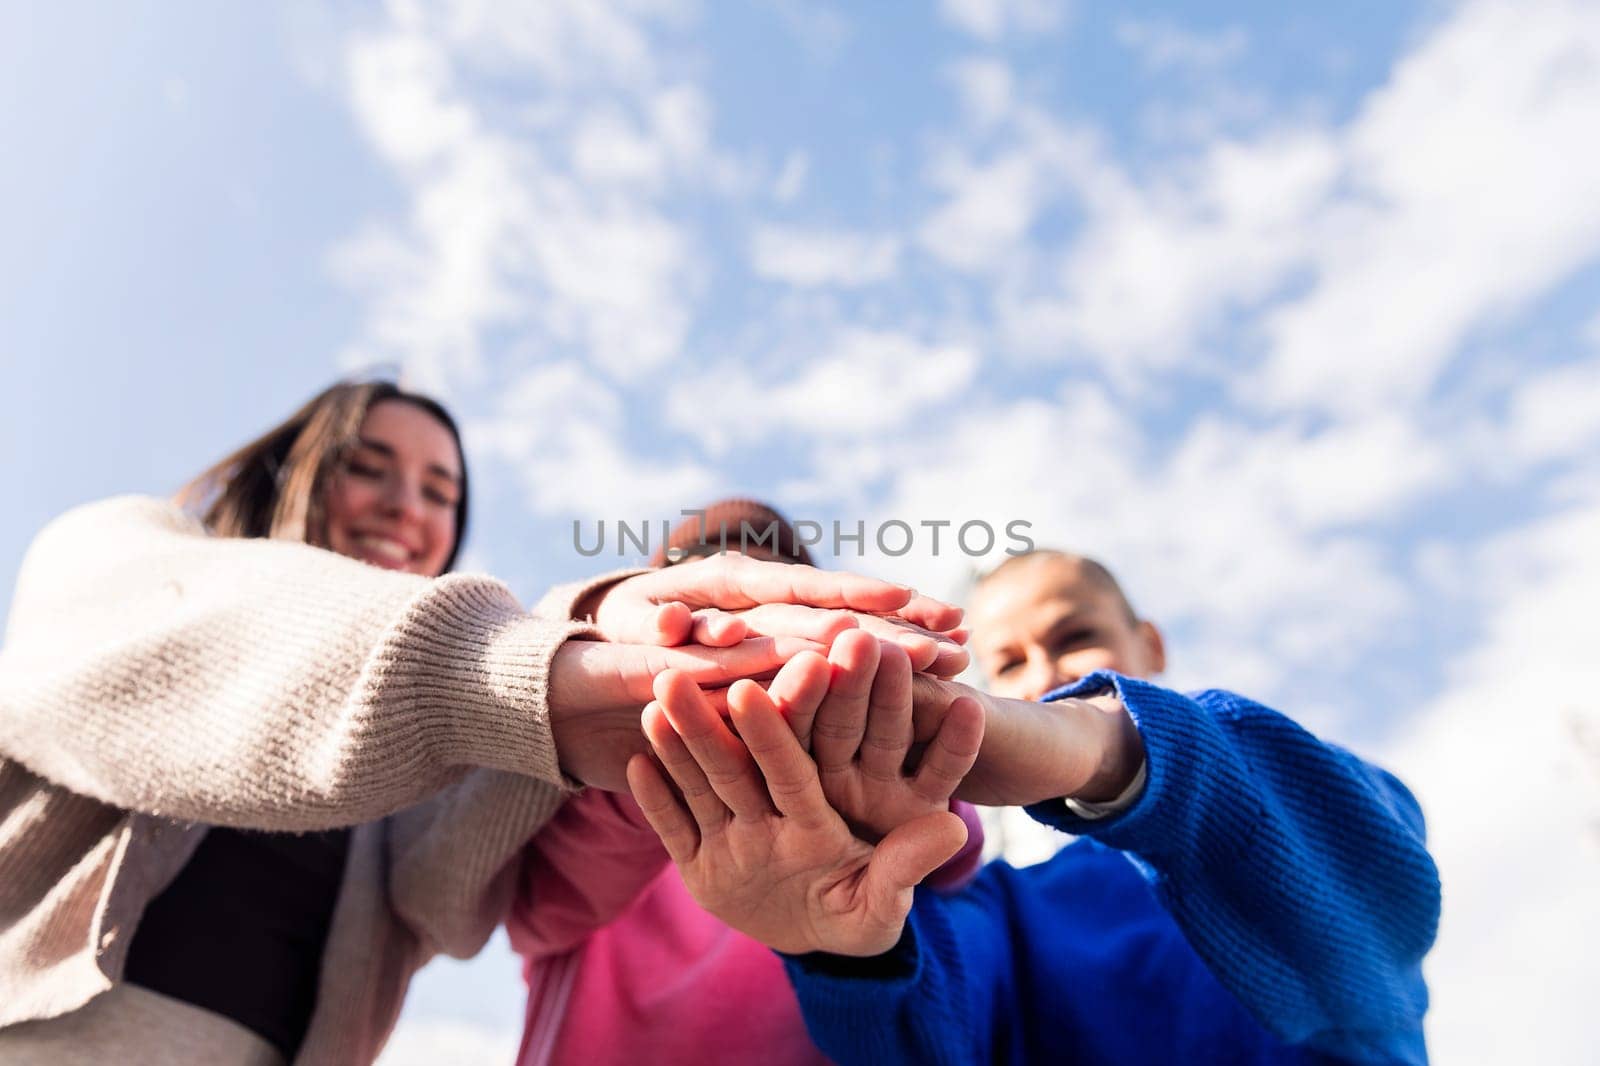 three happy friends holding hands in unity with copy space for text, focus on hands, concept of friendship and bonding